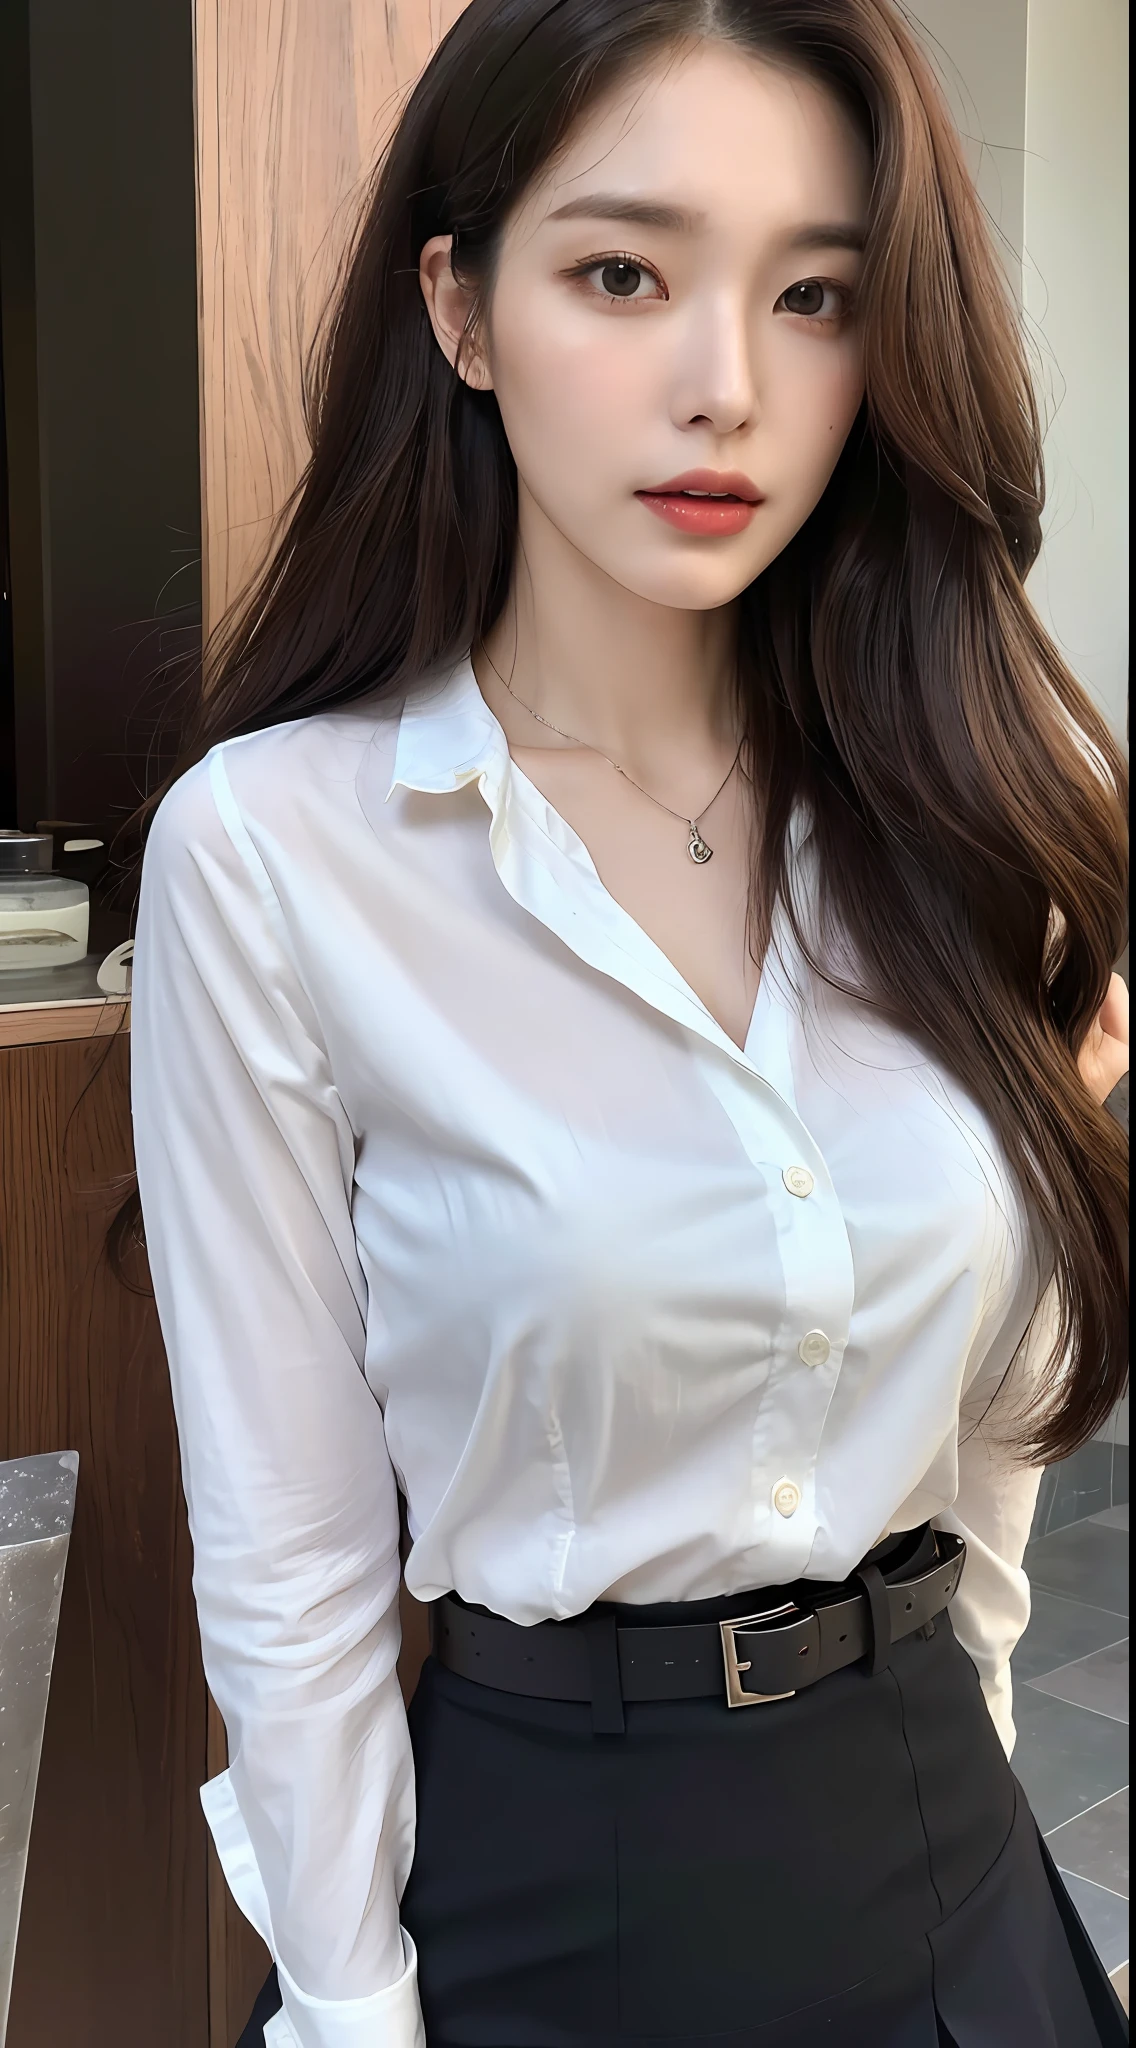 (Best quality, High resolution, Masterpiece :1.3), A tall and pretty woman, Slender abs, Dark brown hair styled in loose waves, Breasts, Wearing pendant, White button up shirt, Belt, Black skirt, (Modern architecture in background), Details exquisitely rendered in the face and skin texture, Detailed eyes, Double eyelid